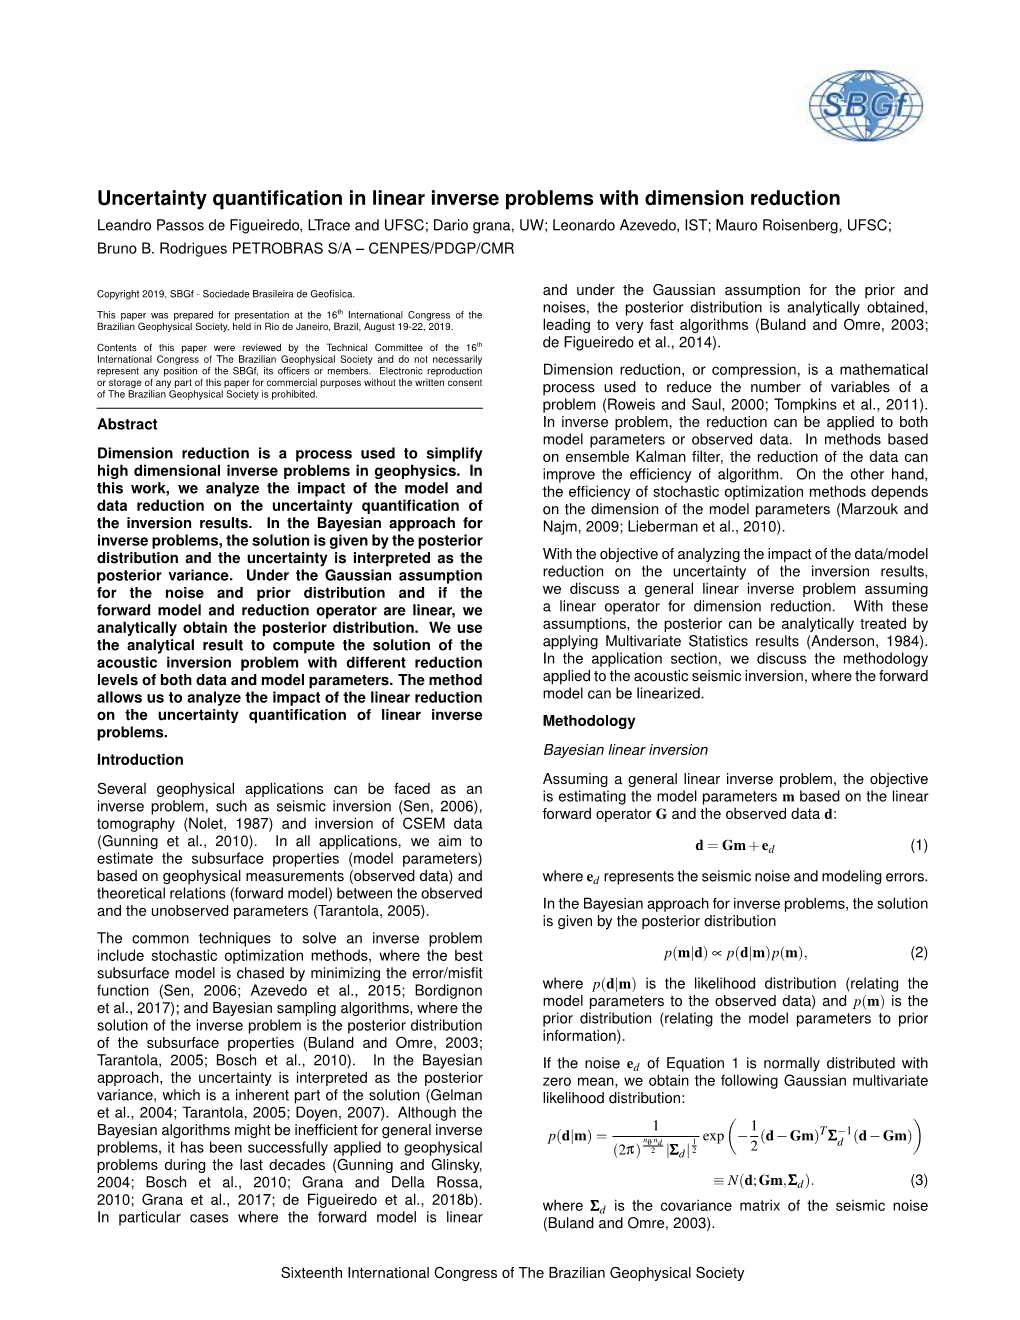 Uncertainty Quantification in Linear Inverse Problems with Dimension